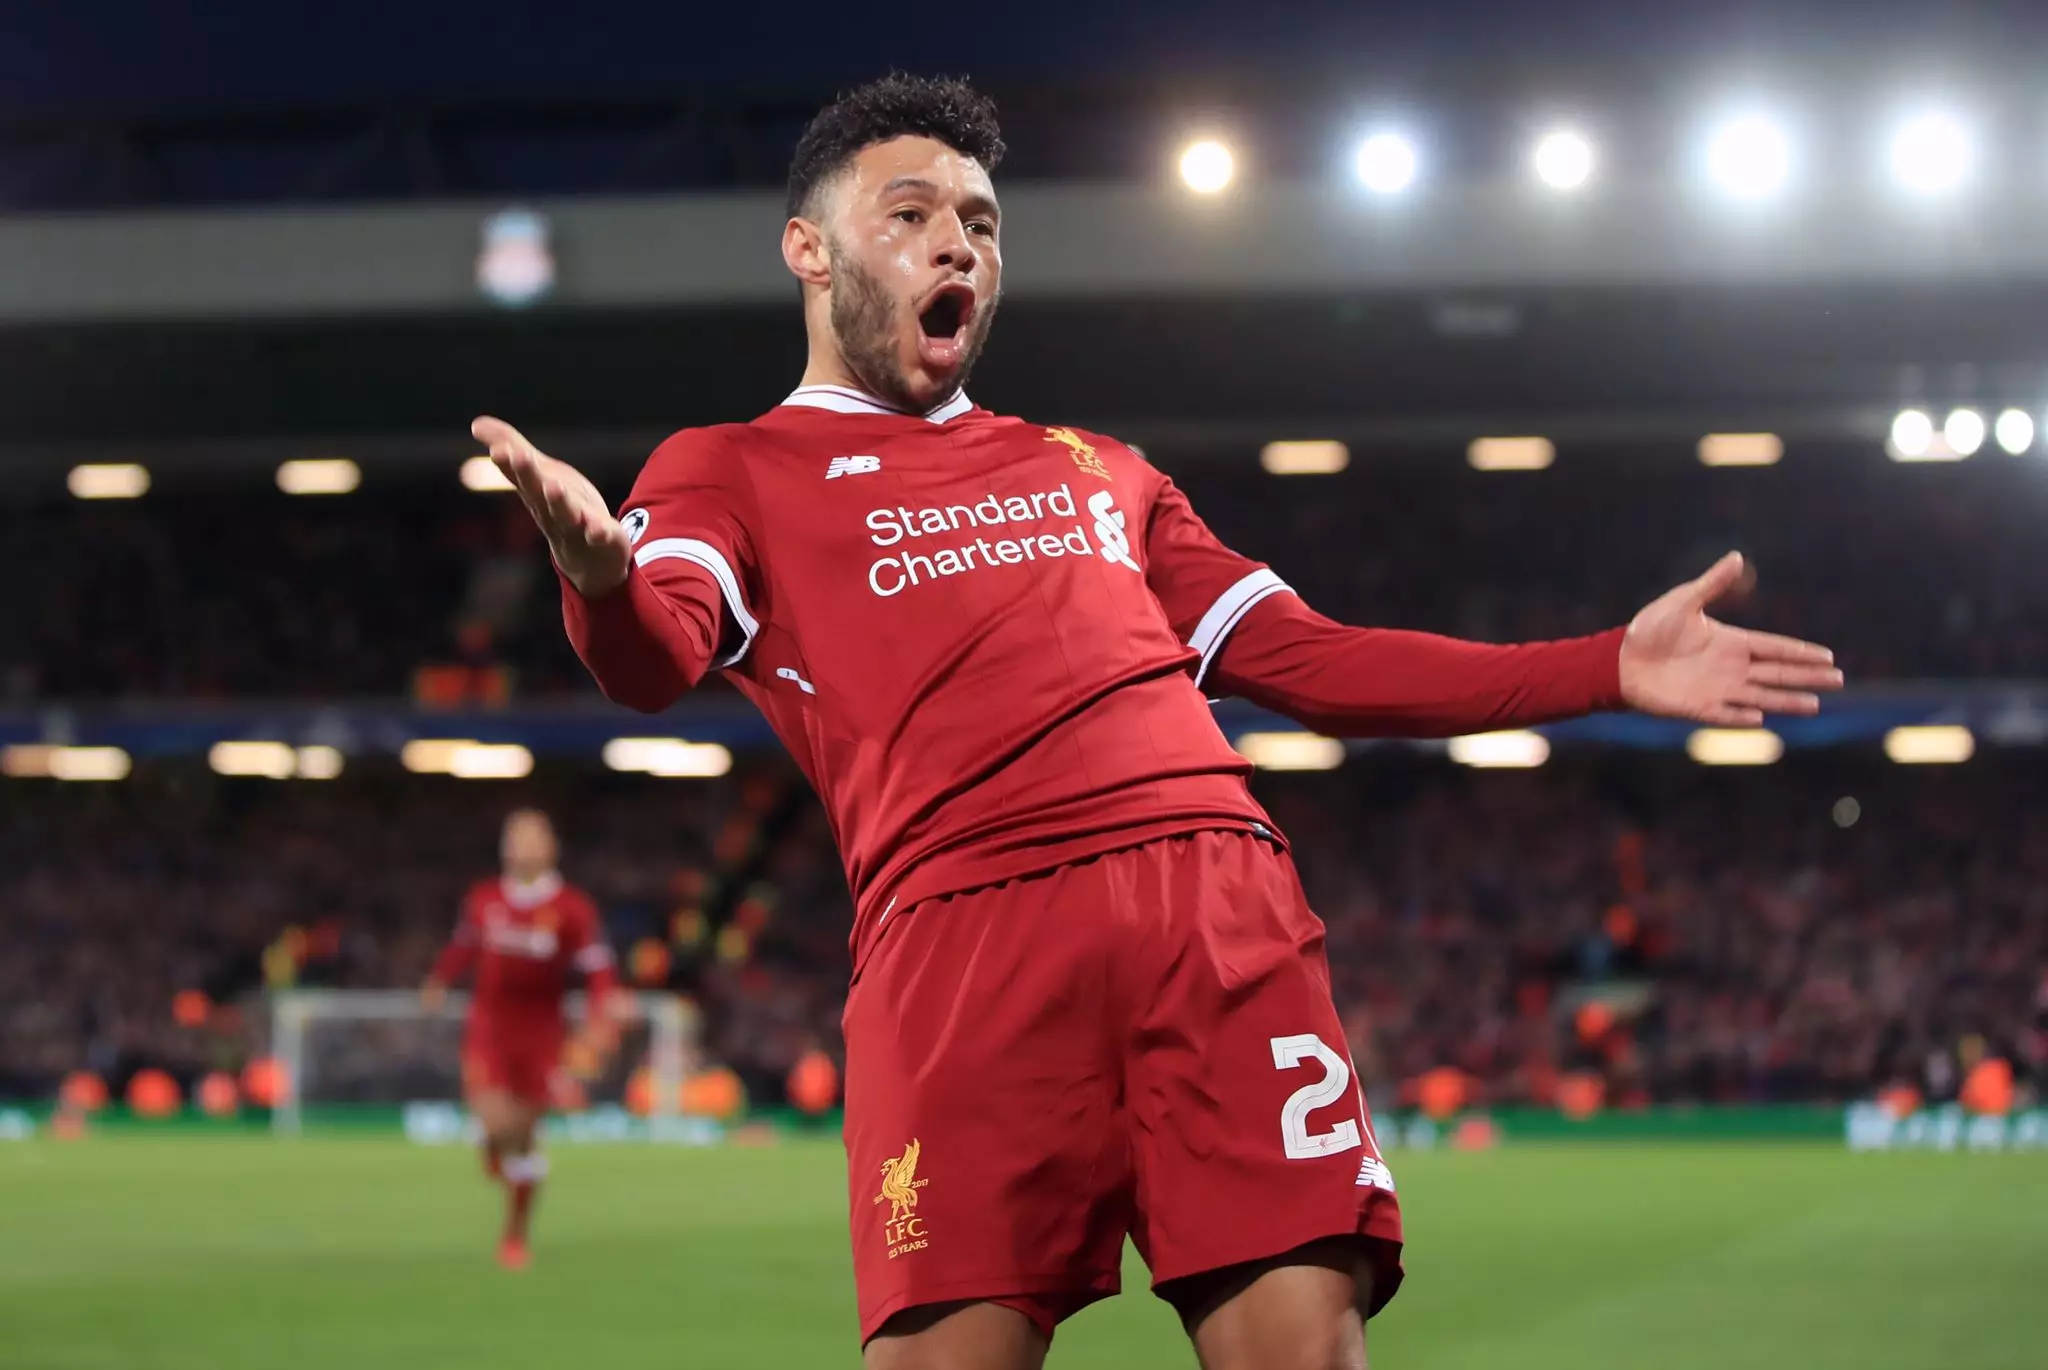 Oxlade-Chamberlain has been much happier at Anfield. Image: PA